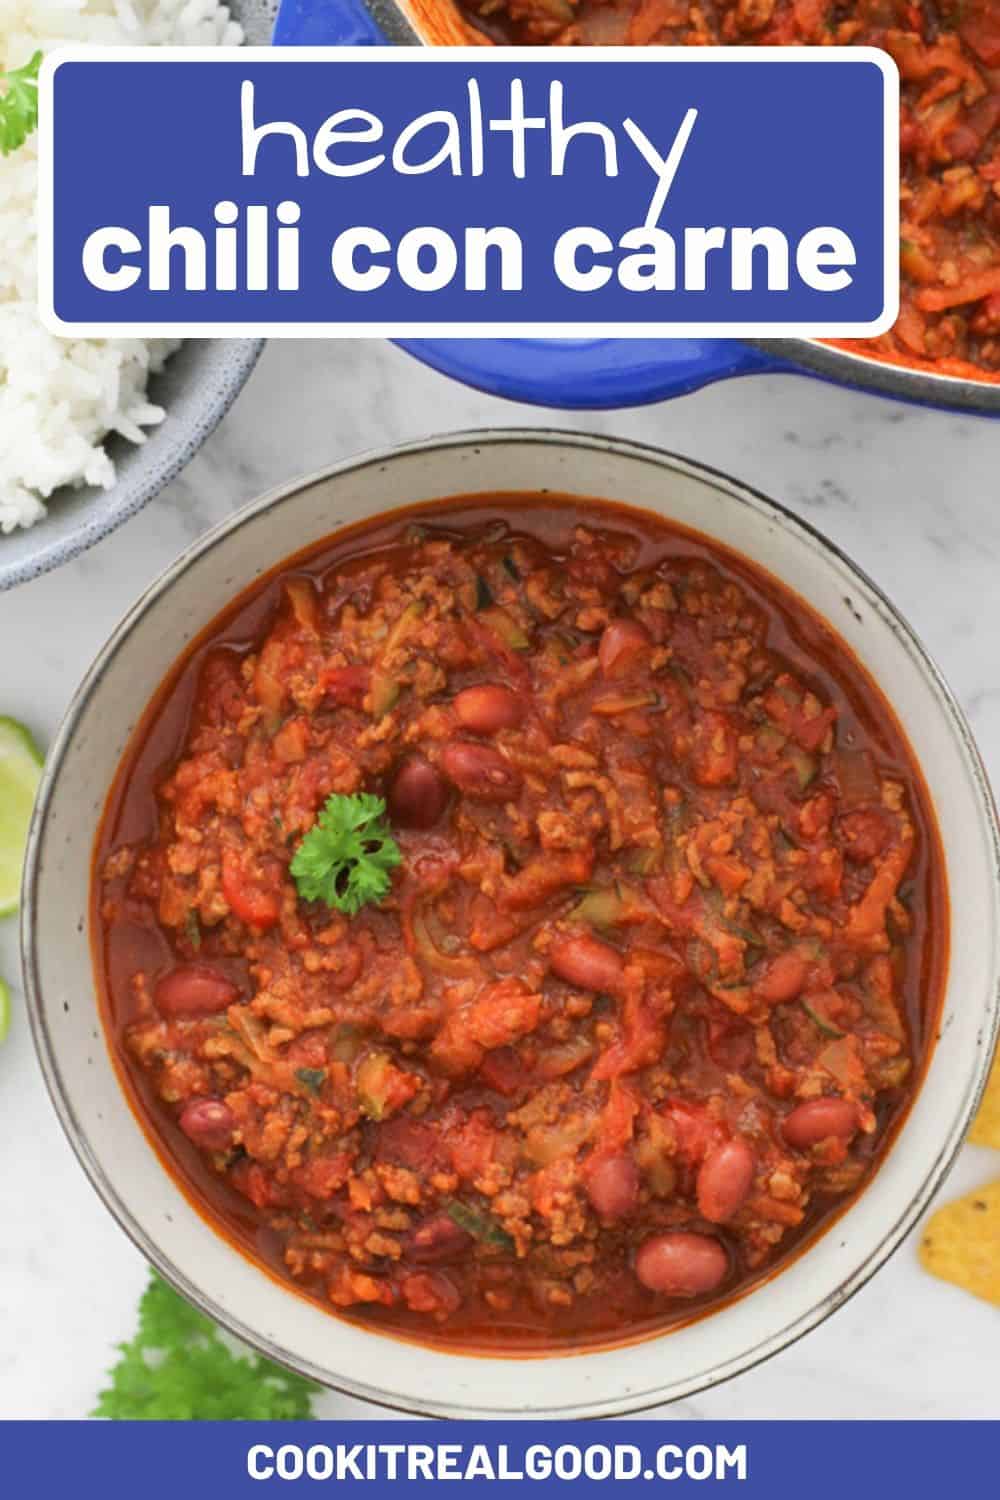 Healthy Chilli Con Carne - Cook it Real Good